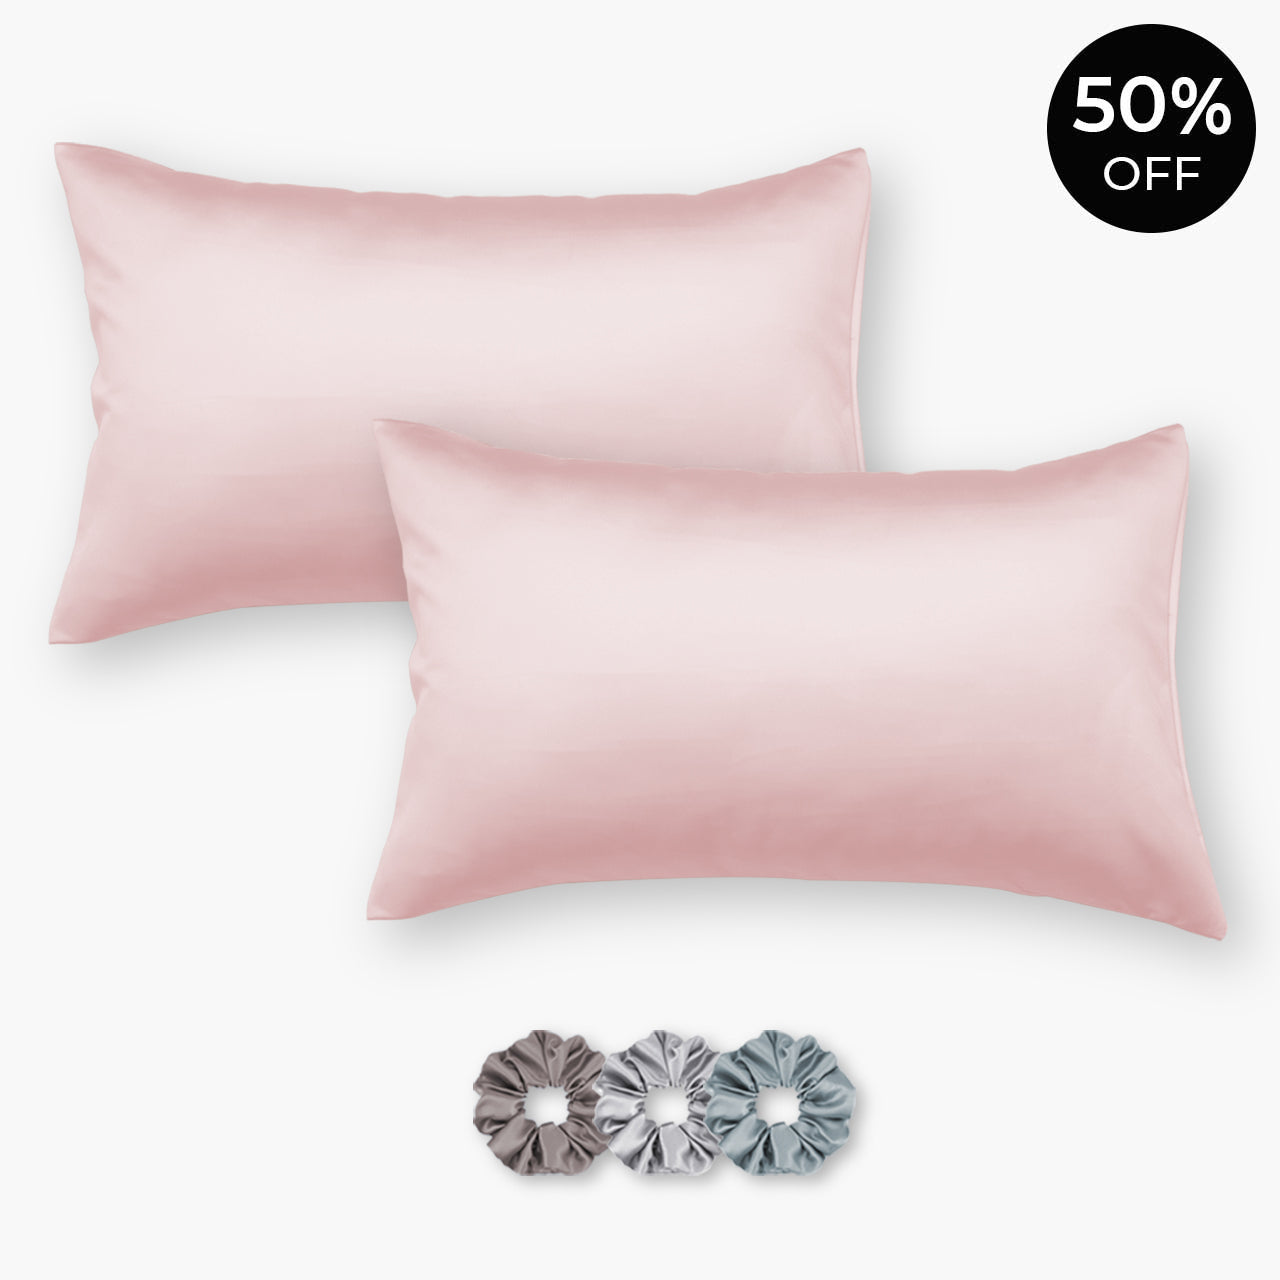 Peach Satin Pillowcases - Set of 2 (With 3 Free Scrunchies)